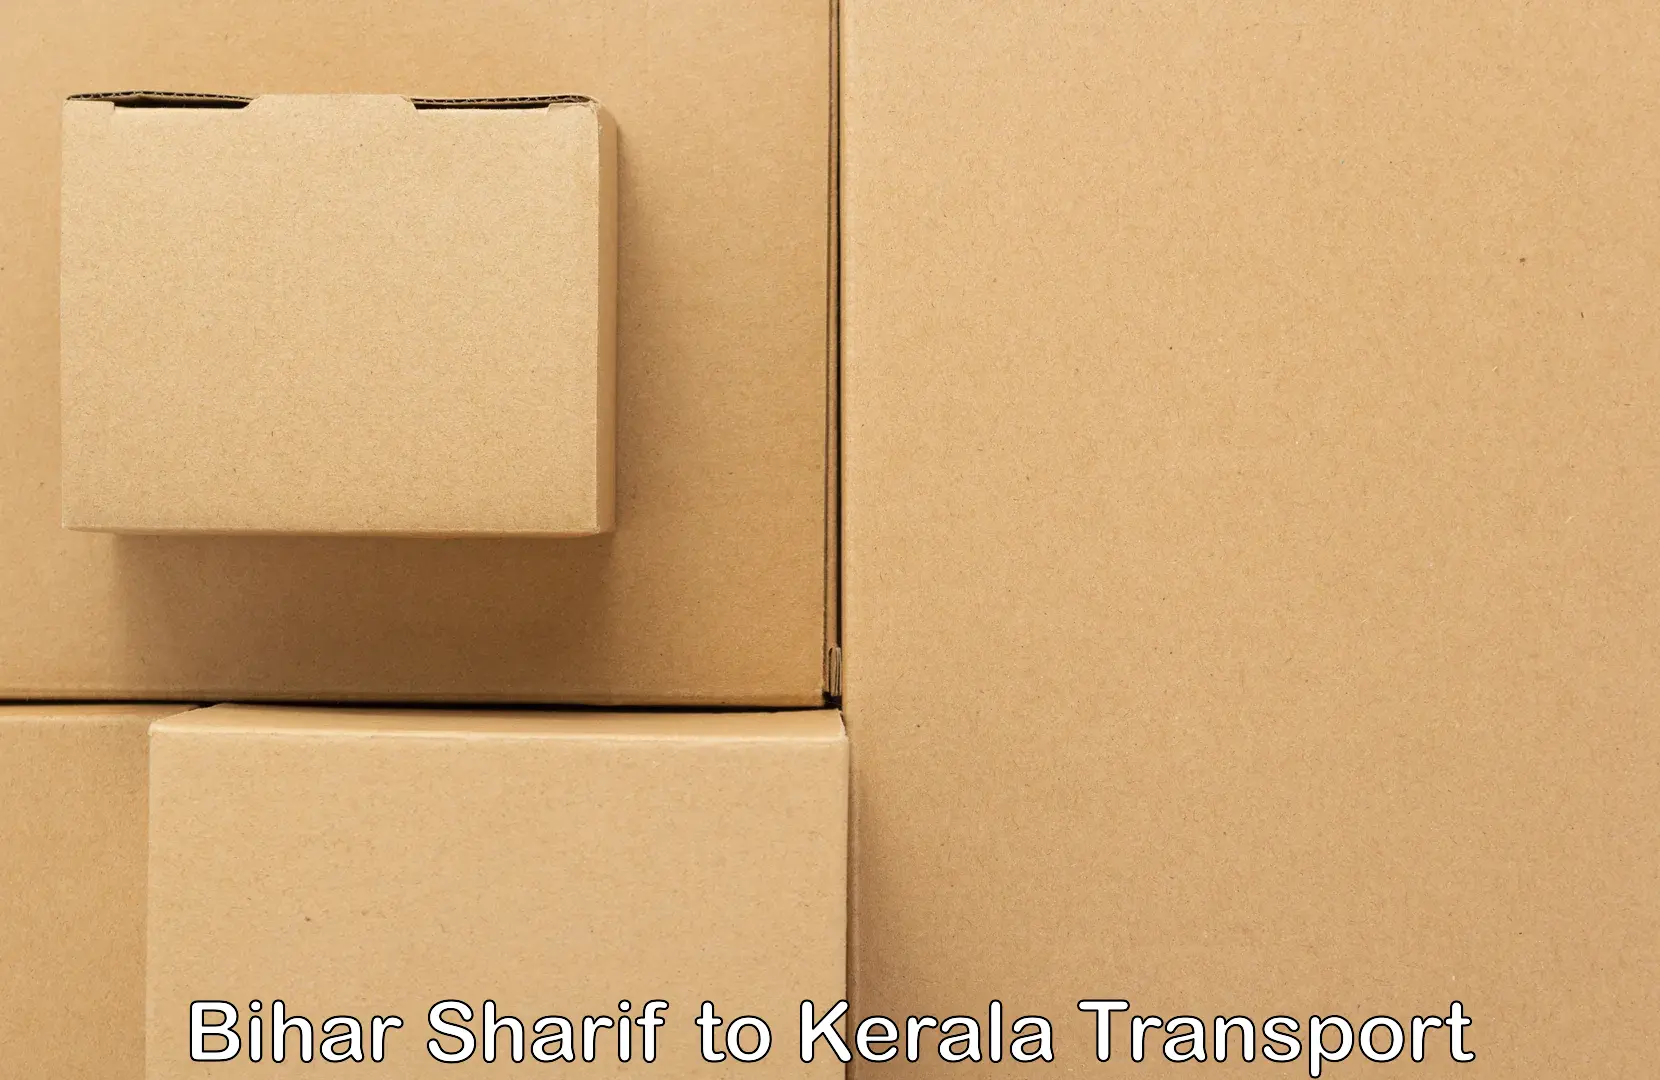 Commercial transport service Bihar Sharif to Cochin University of Science and Technology